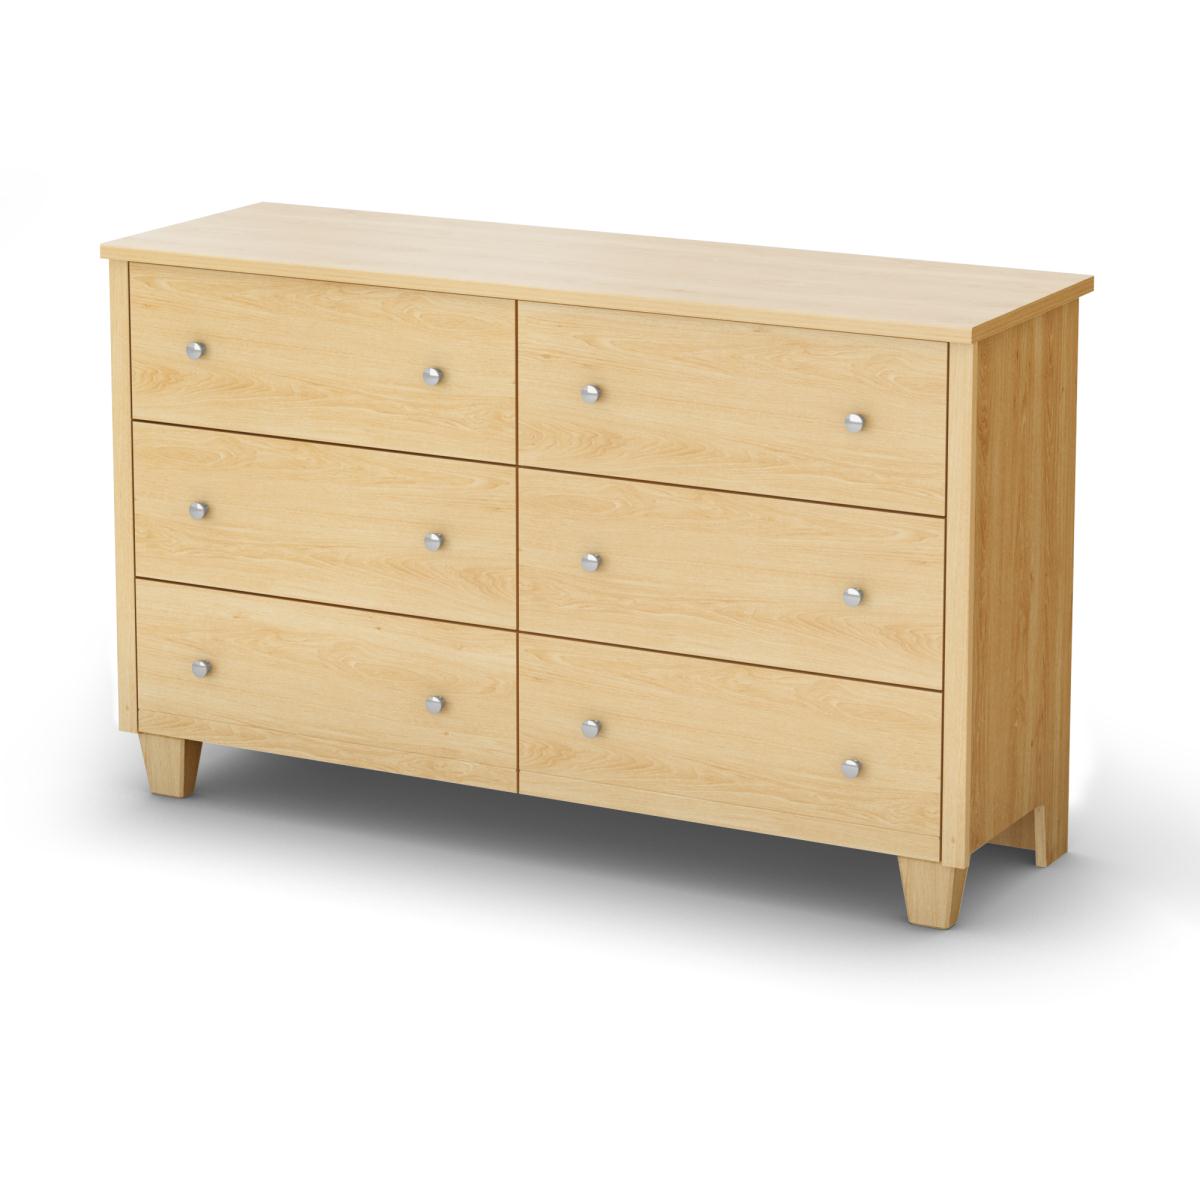 South Shore Clever Room 6 Drawer Dresser - Natural Maple